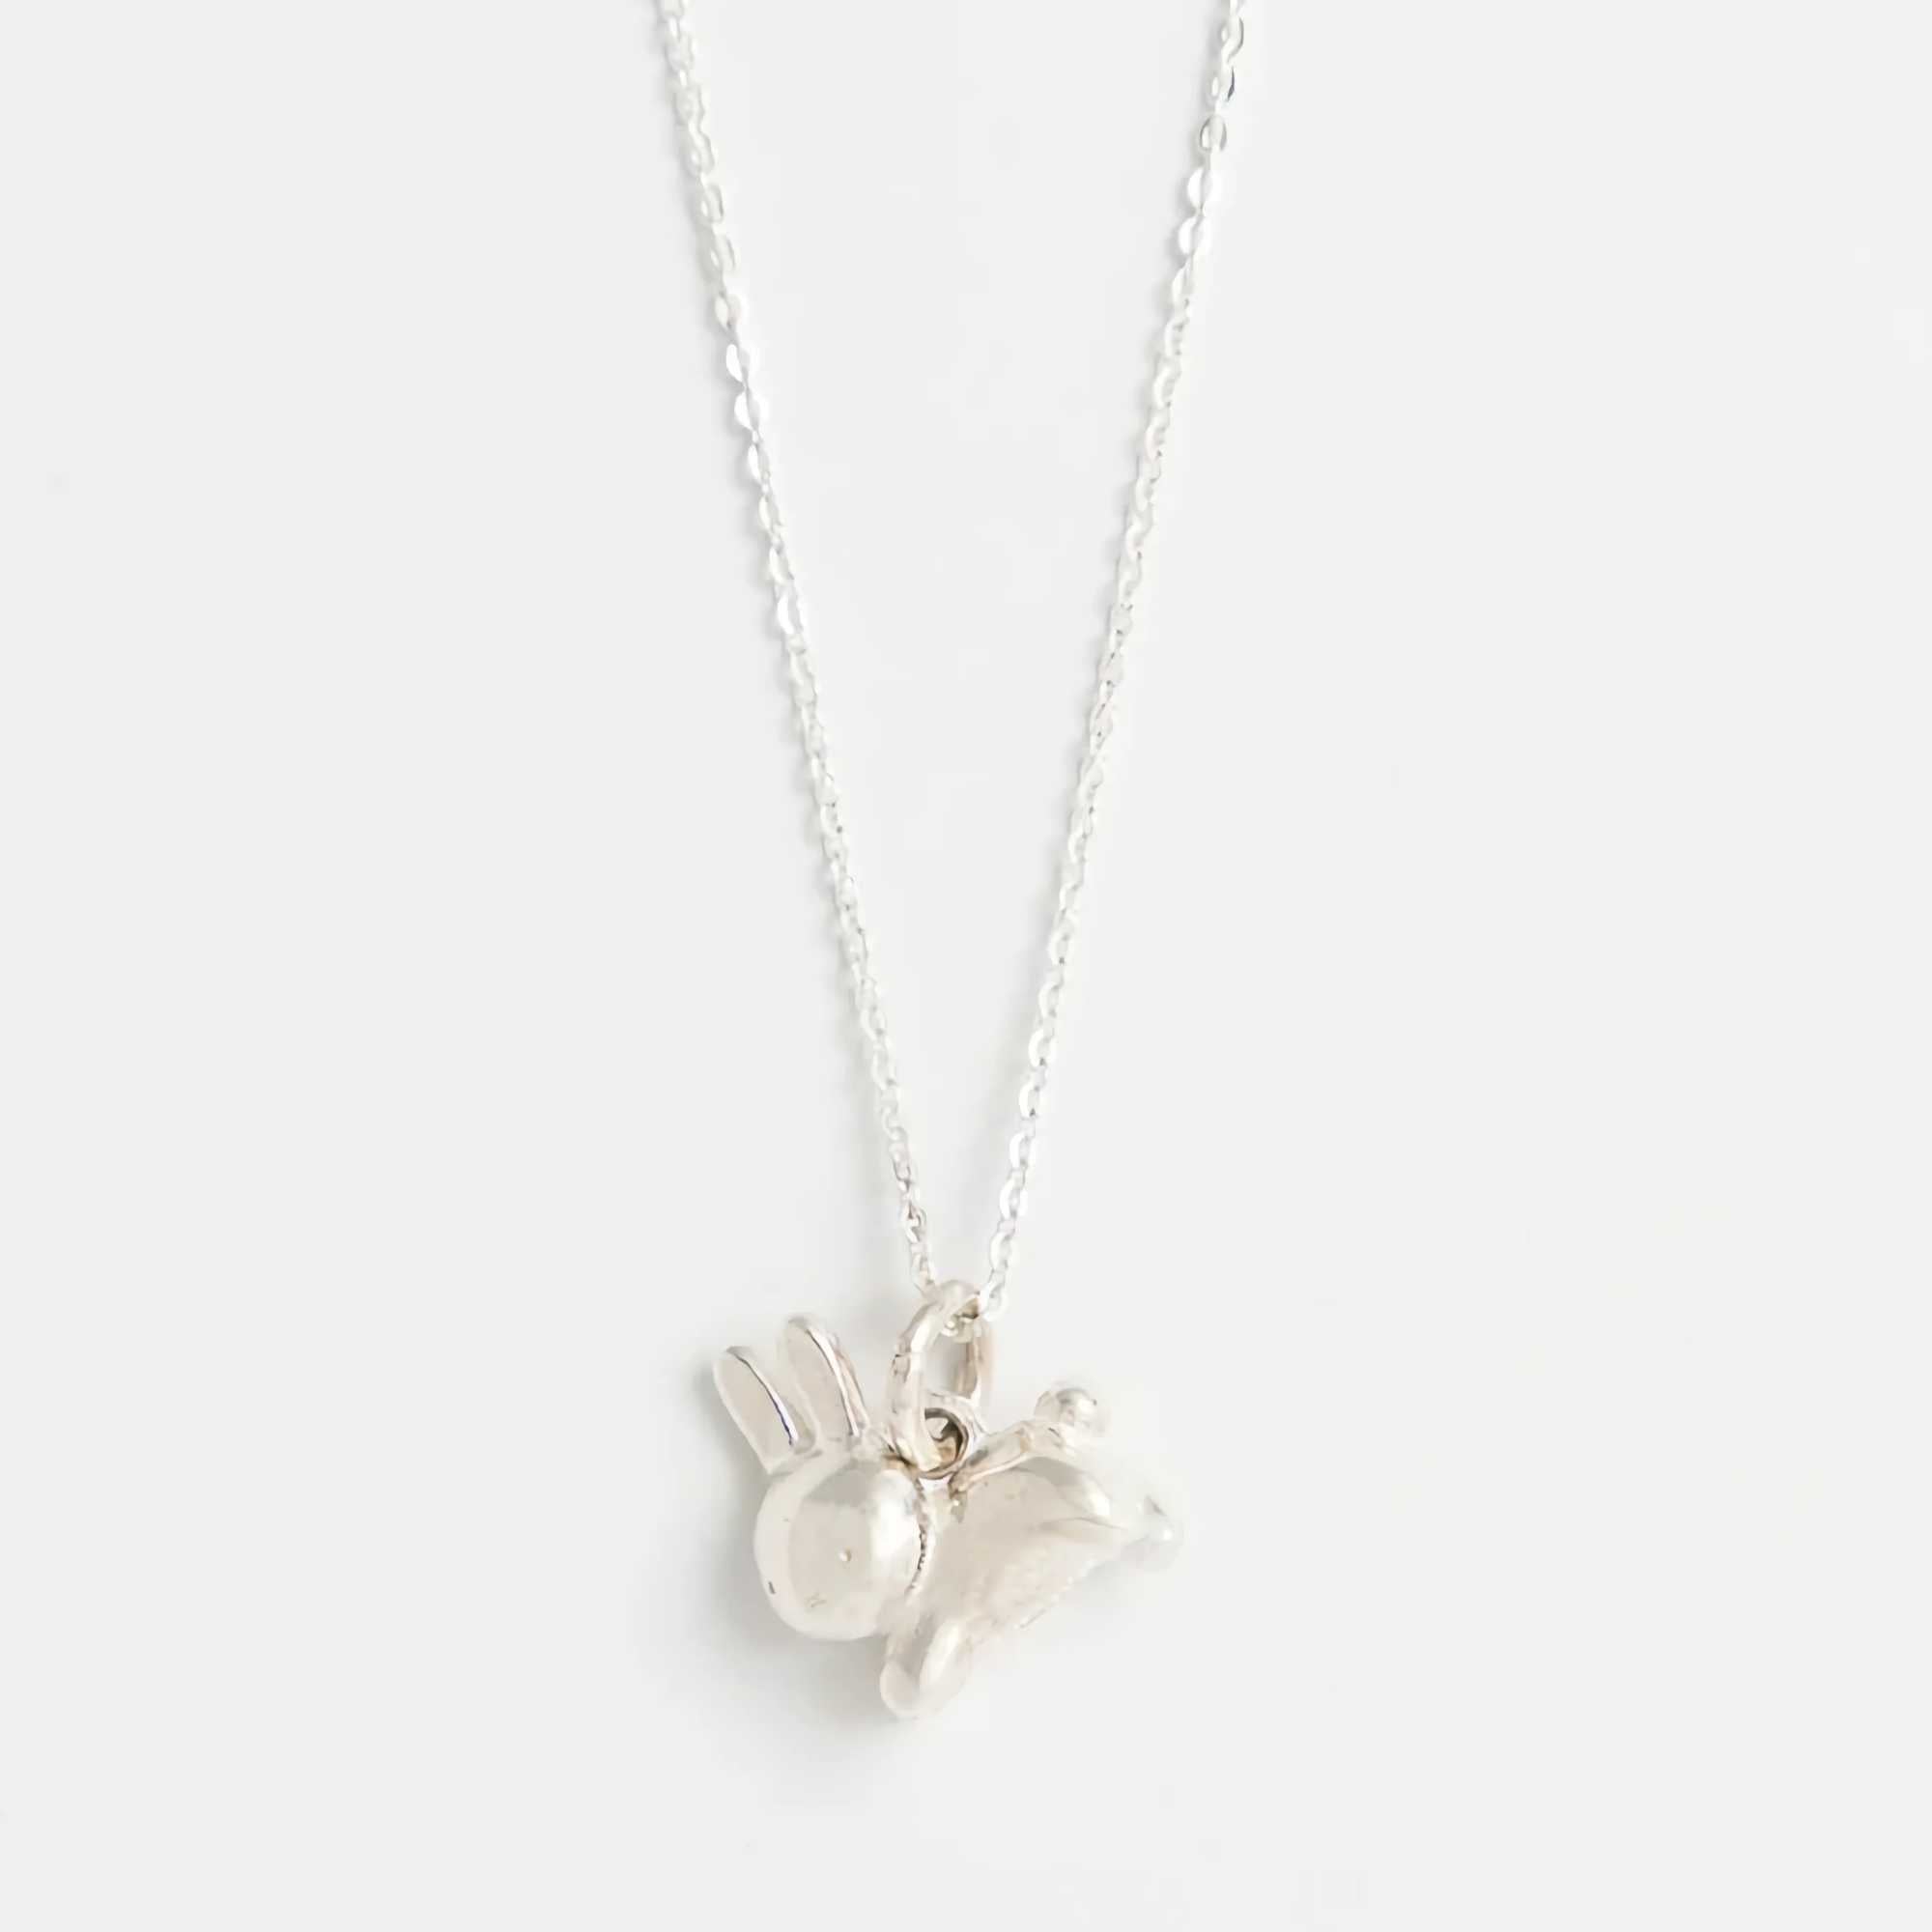 Miffy Leaping Rabbit Necklace, 925 Sterling Silver